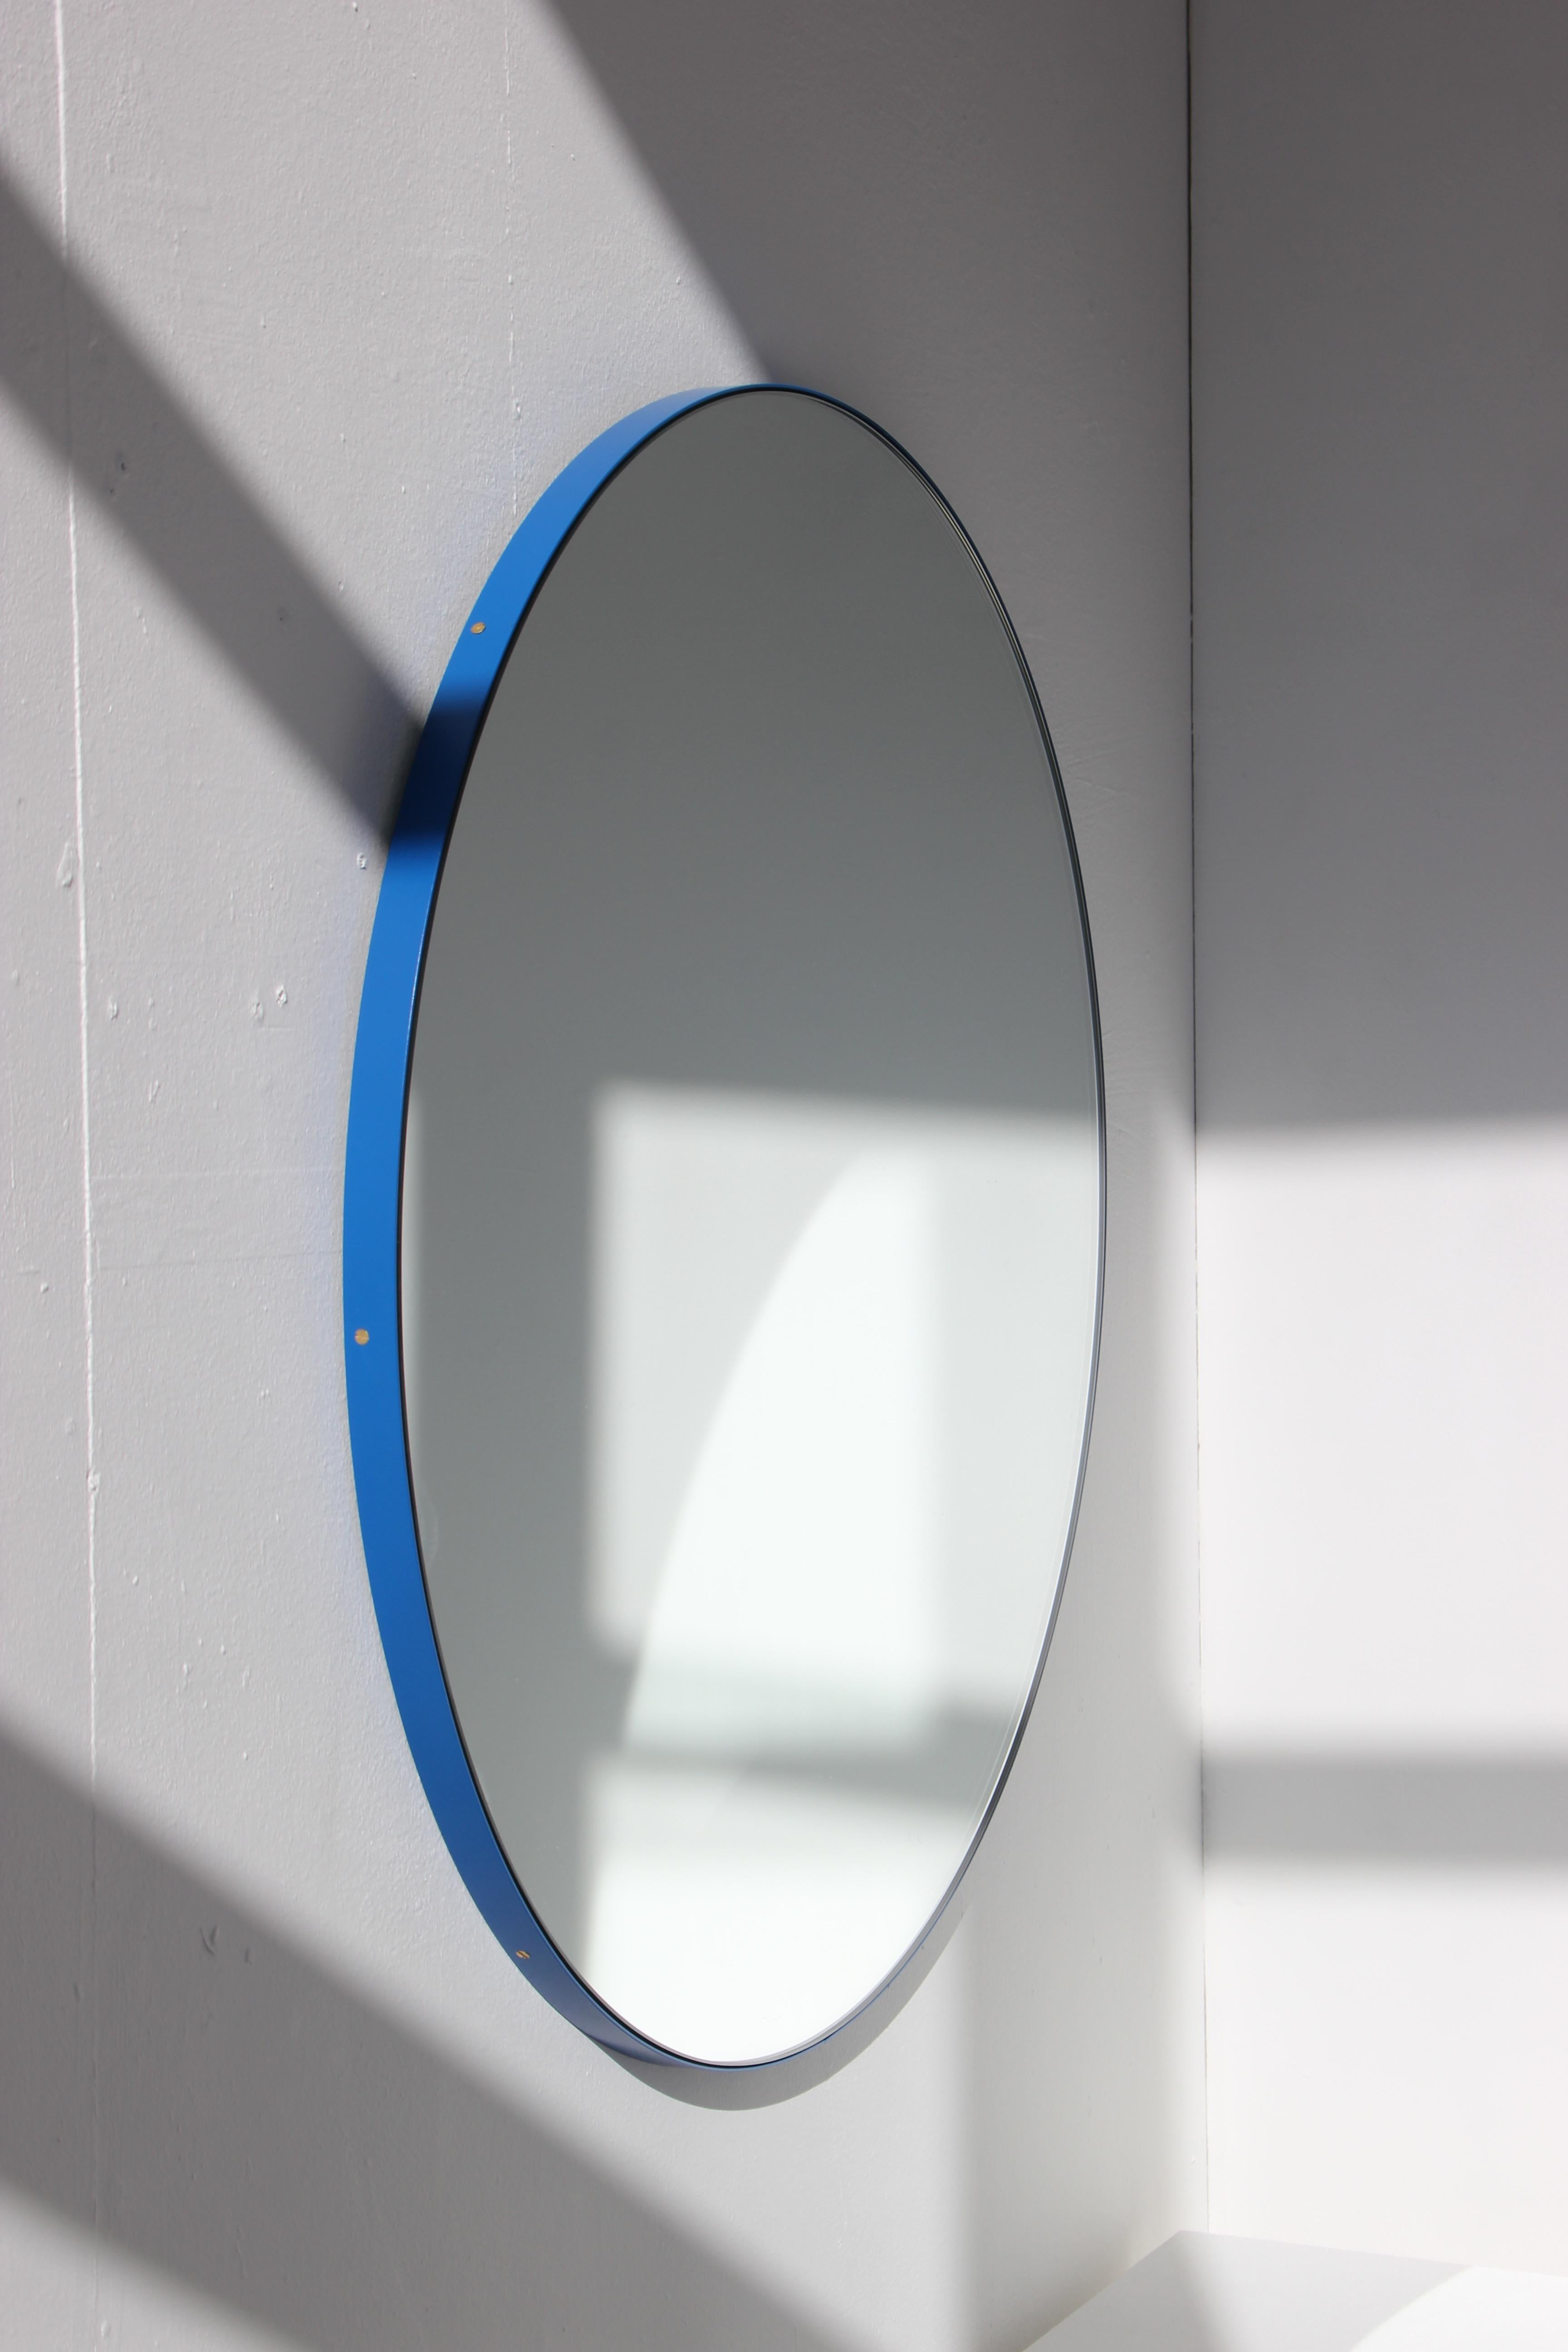 Modern round mirror with a vibrant powder coated aluminium blue frame. Designed and handcrafted in London, UK.

Fitted with a brass hook or an aluminium z-bar depending on the size of the mirror. Also available on demand with a split batten system